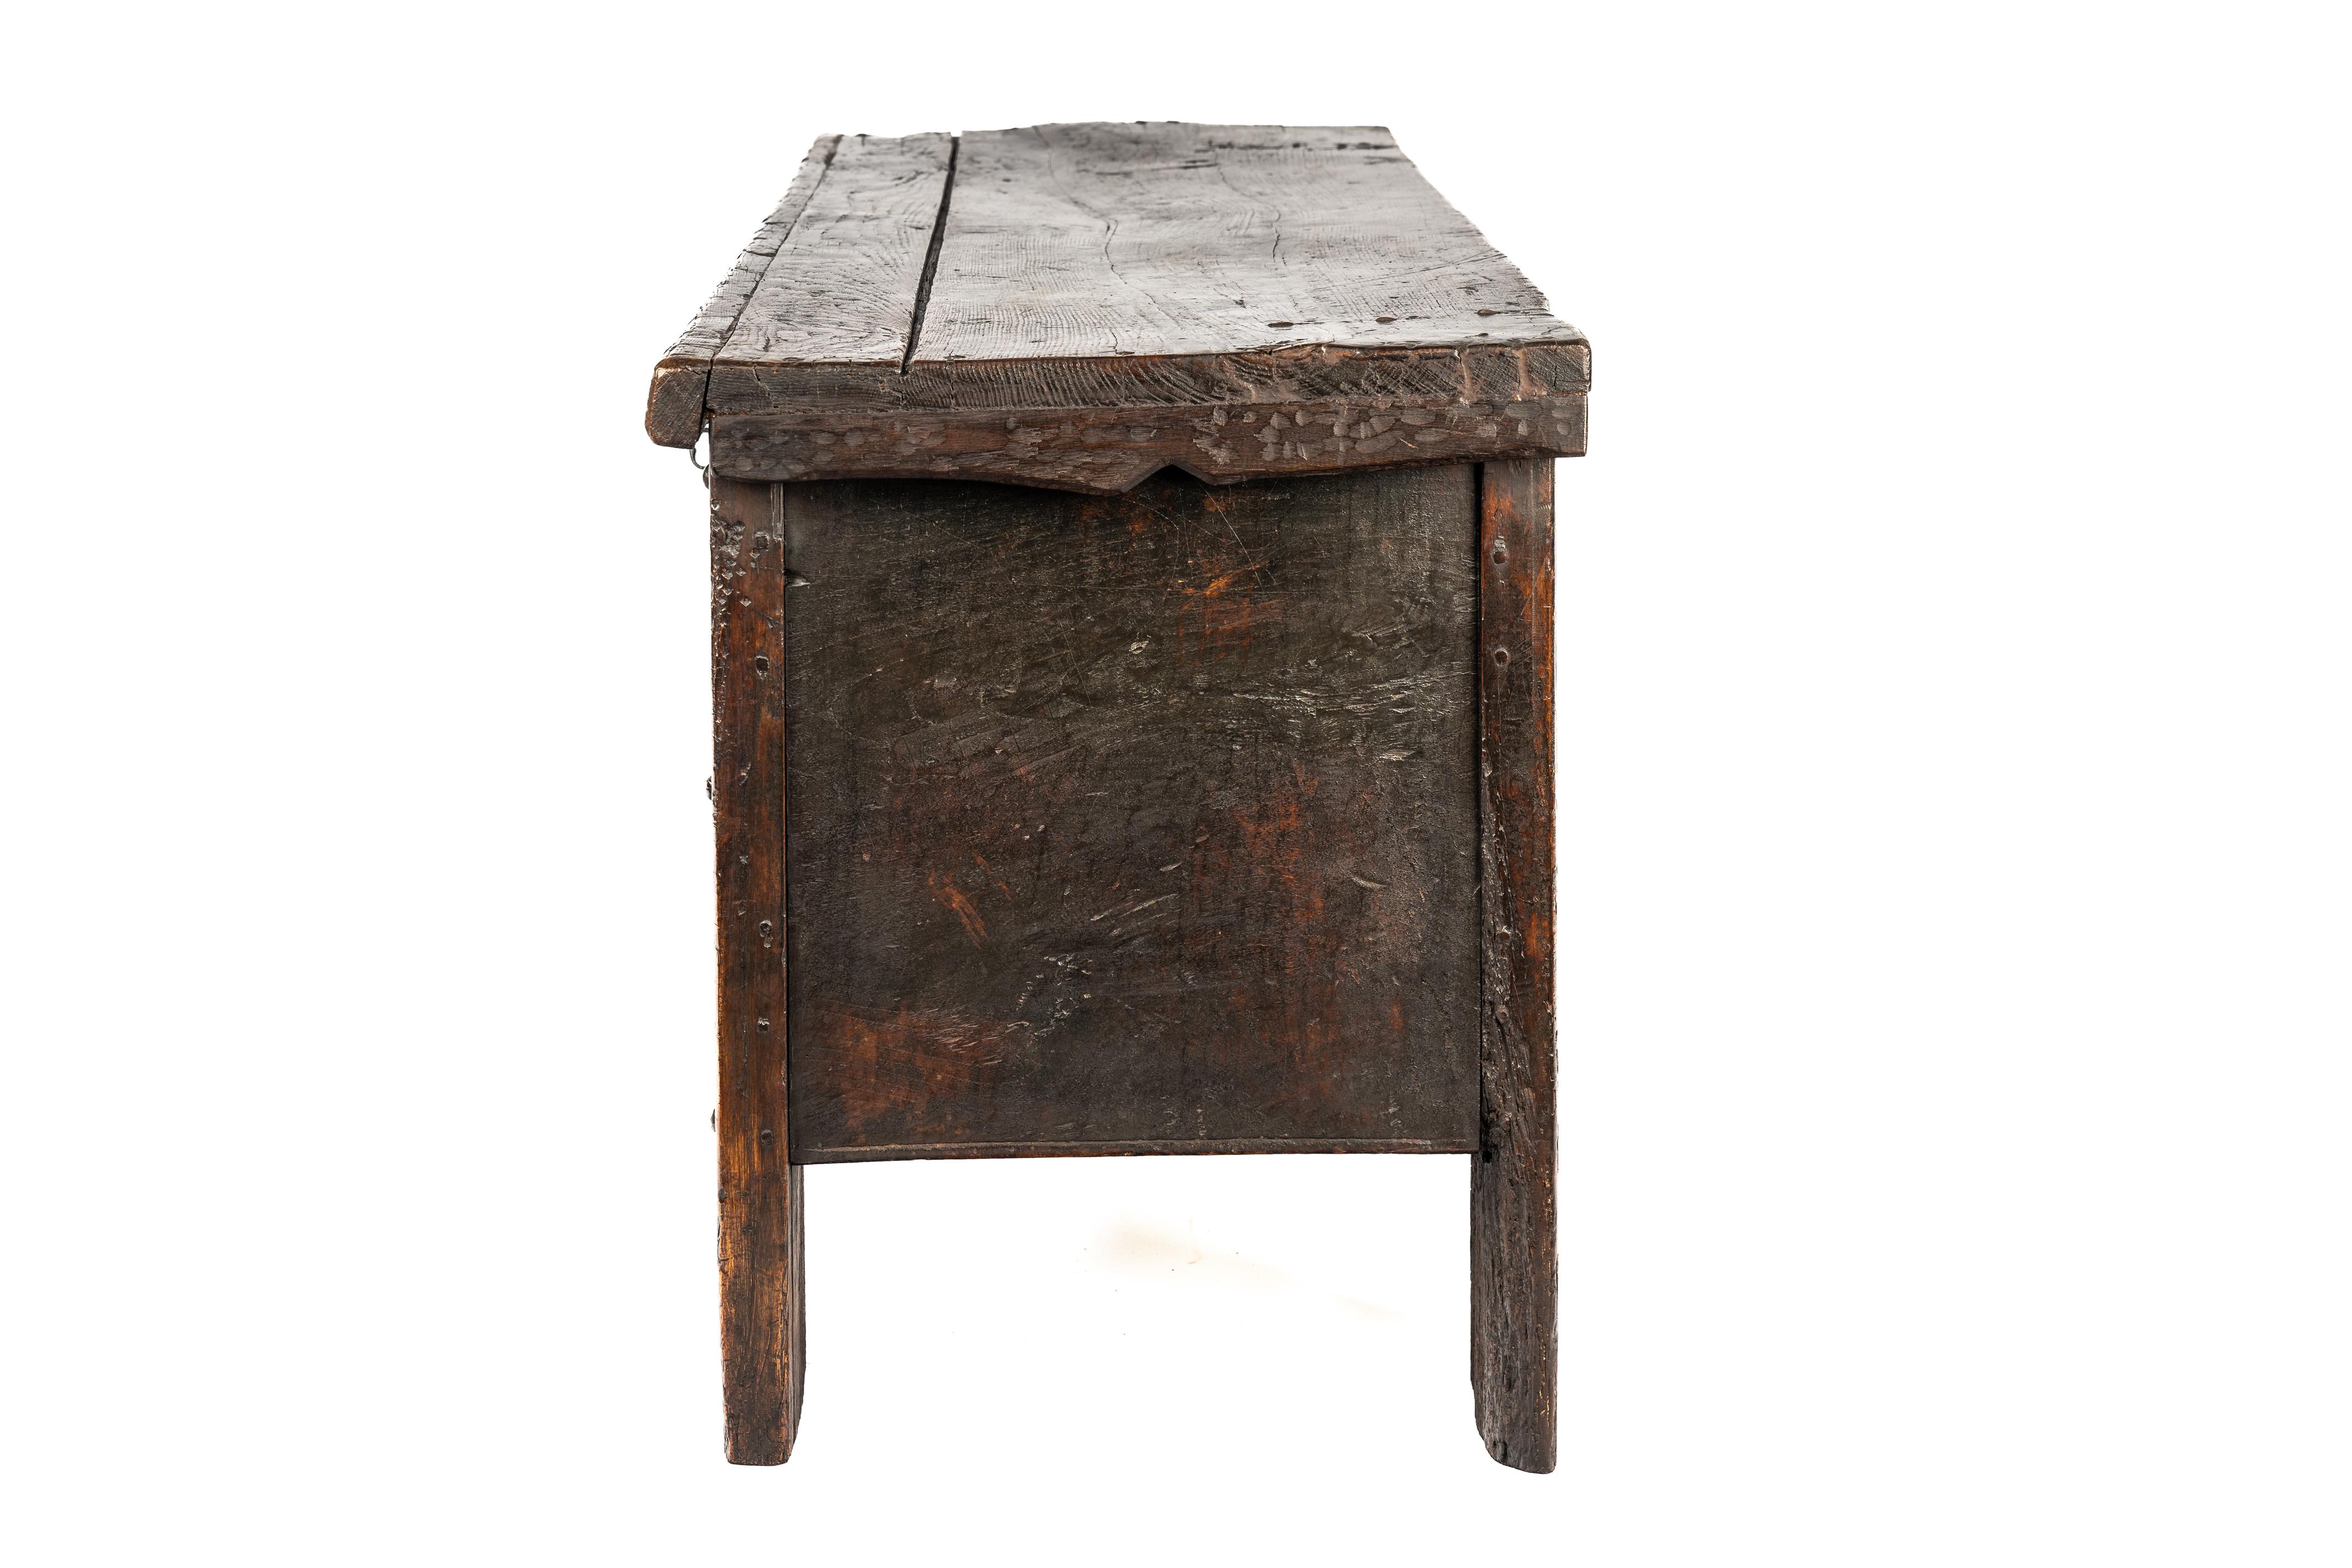 Forged Antique Early 17th Century Spanish Dark Brown Chestnut Wood Trunk or Chest  For Sale